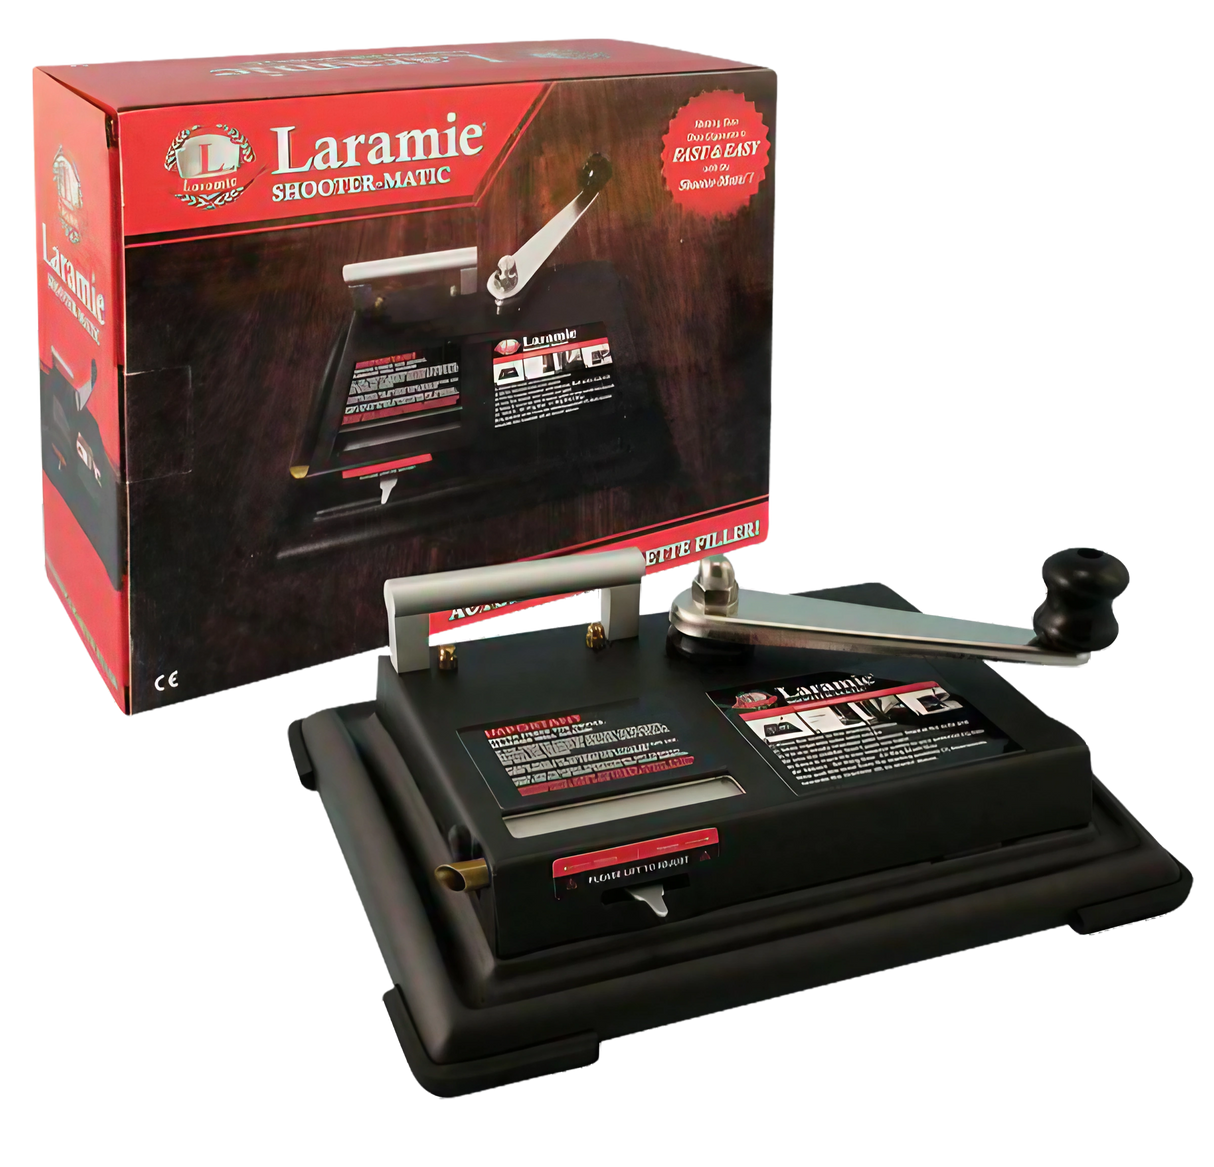 Laramie Shootermatic Manual Cigarette Injector Machine for King Size, side view with box